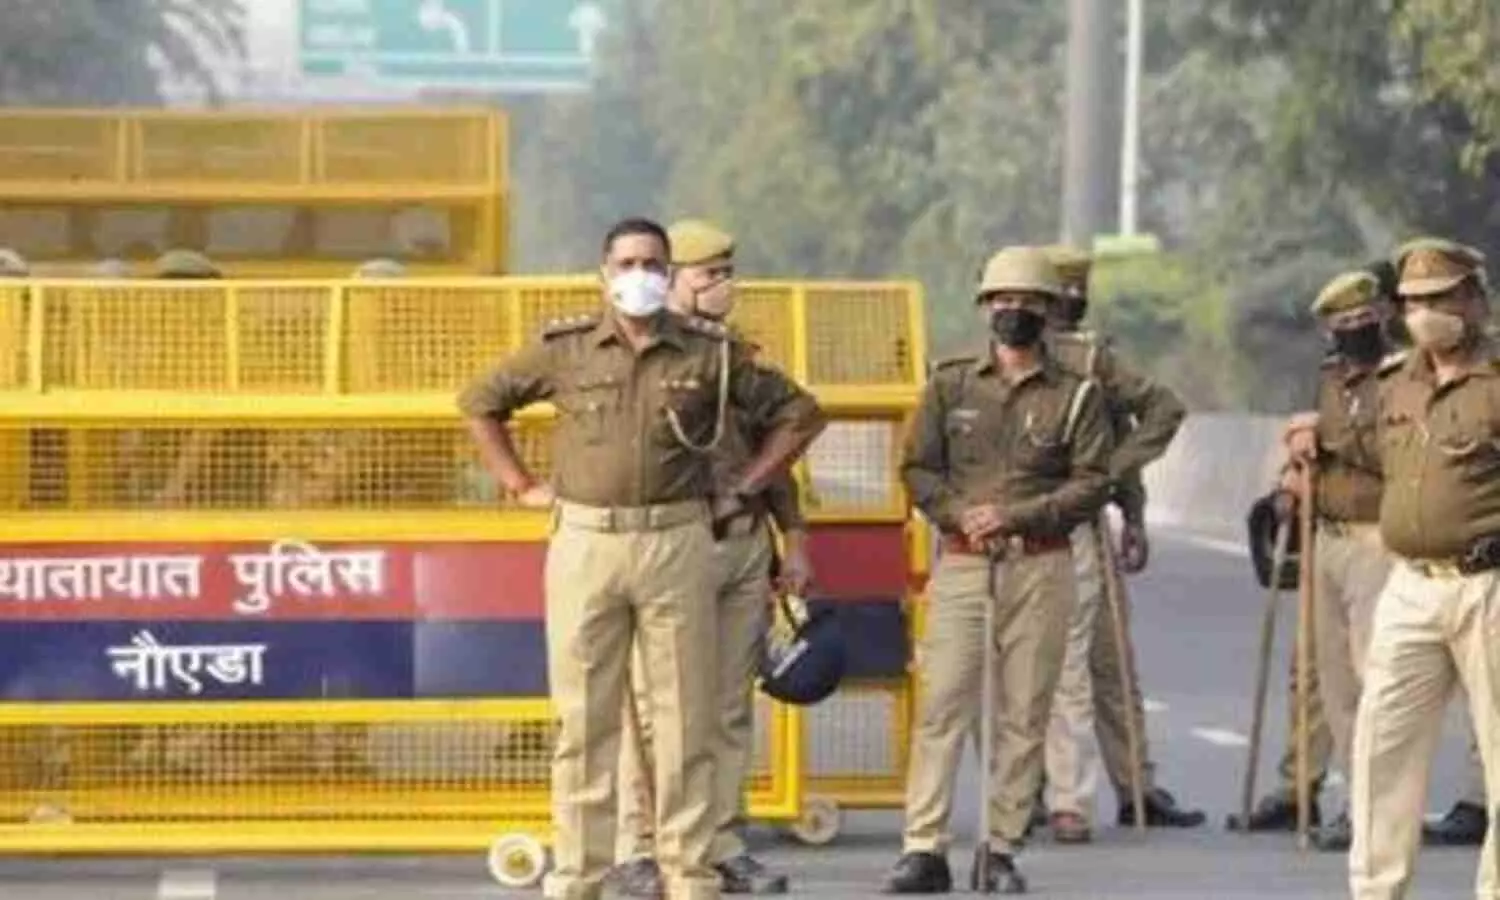 Section 144 imposed in Noida